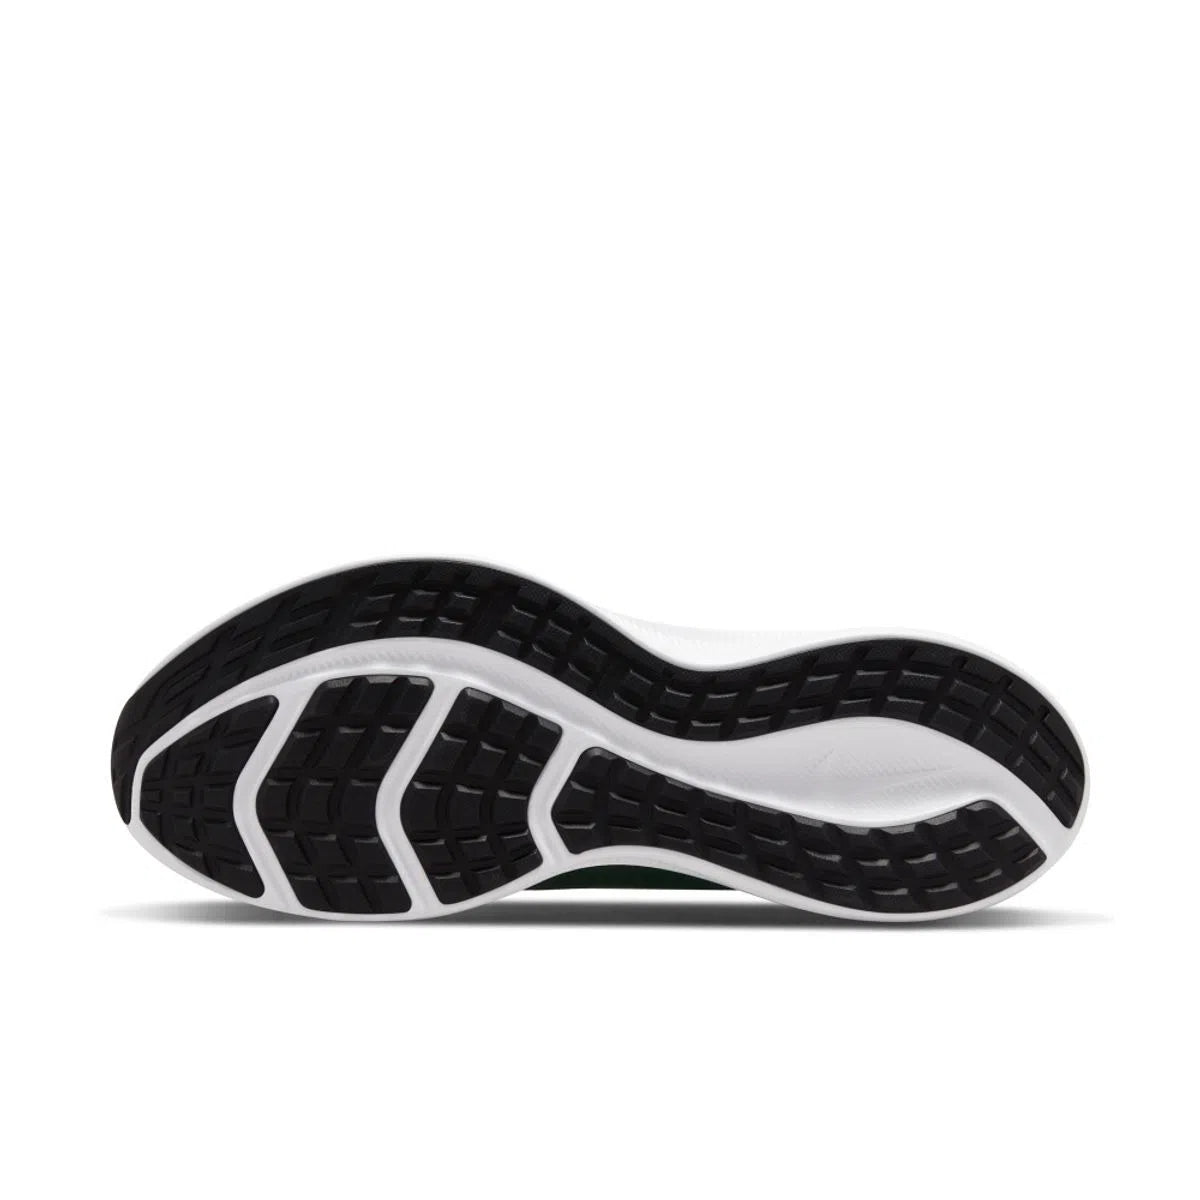 Nike Downshifter 11 Hombre